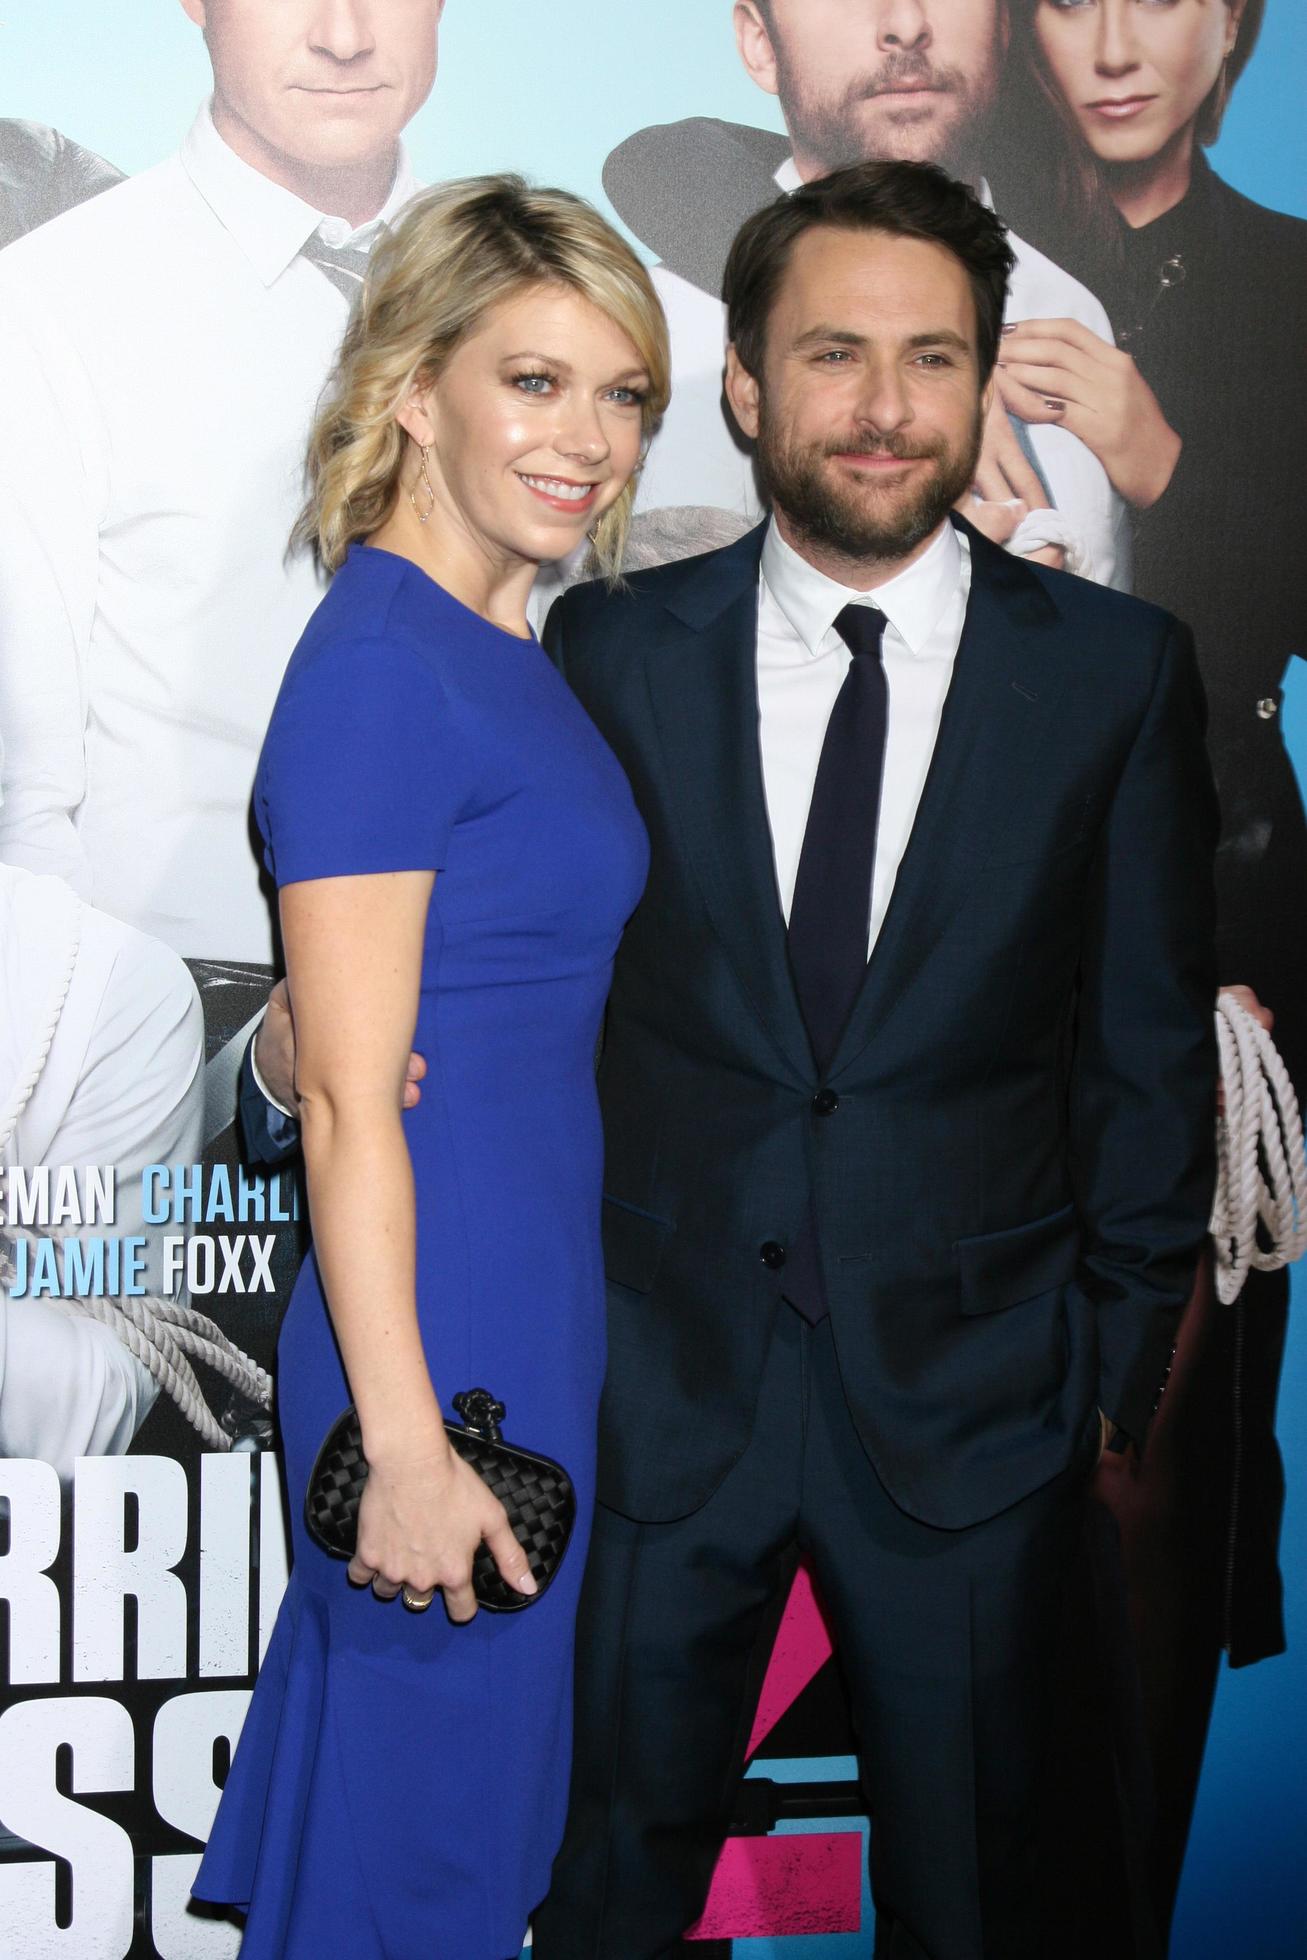 LOS ANGELES, CA - JUNE 30, 2011: Charlie Day & wife Mary Elizabeth Ellis at  the Los Angeles premiere of his new movie Horrible Bosses at Grauman's  Chinese Theatre, Hollywood Stock Photo - Alamy